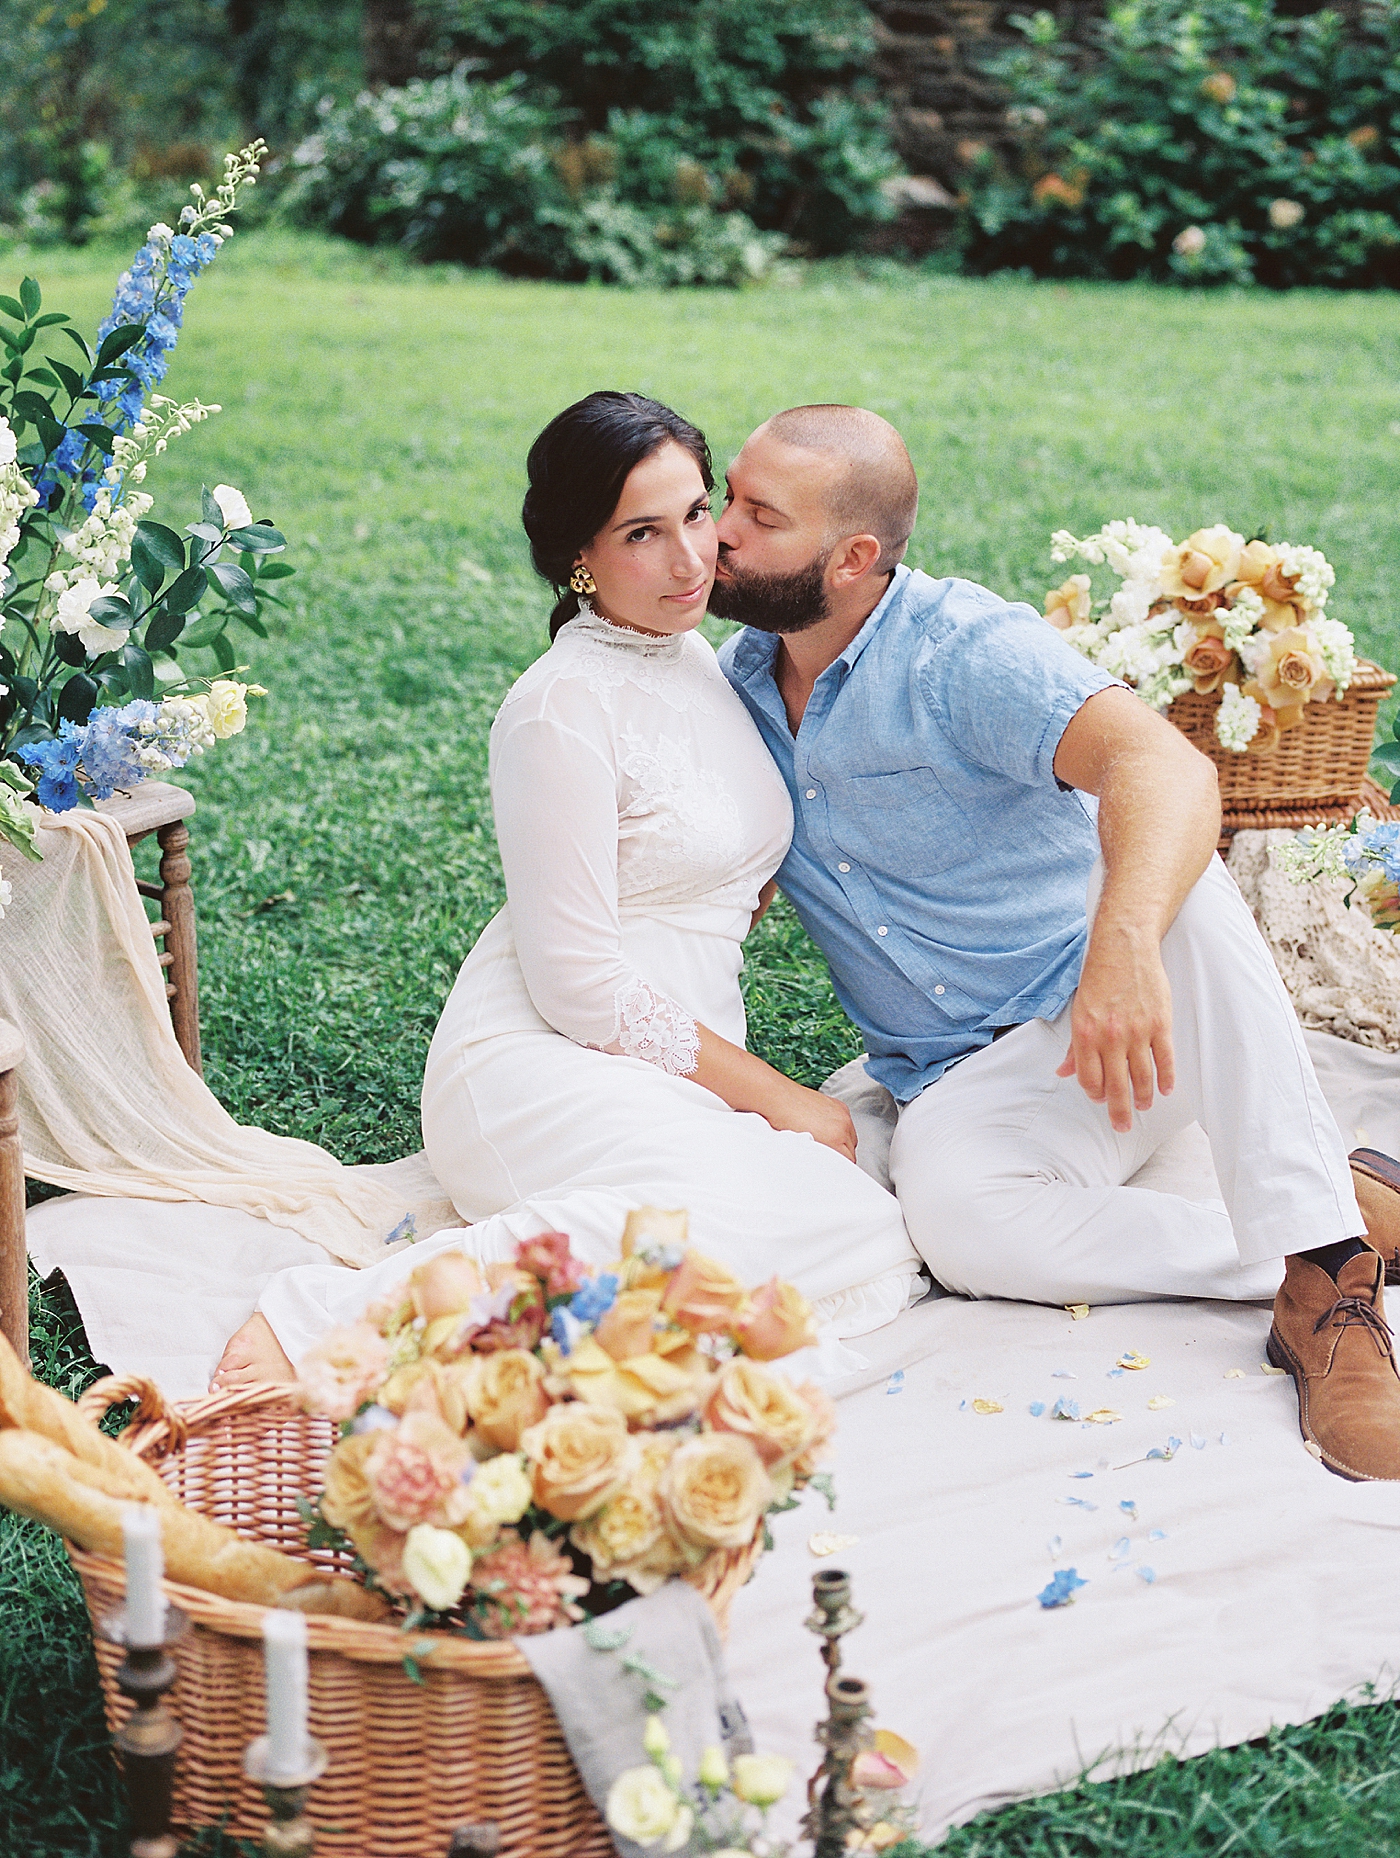 Groom kissing bride on the cheek at a picnic | Styling and Planning Engagement Sessions with Hope Helmuth Photography